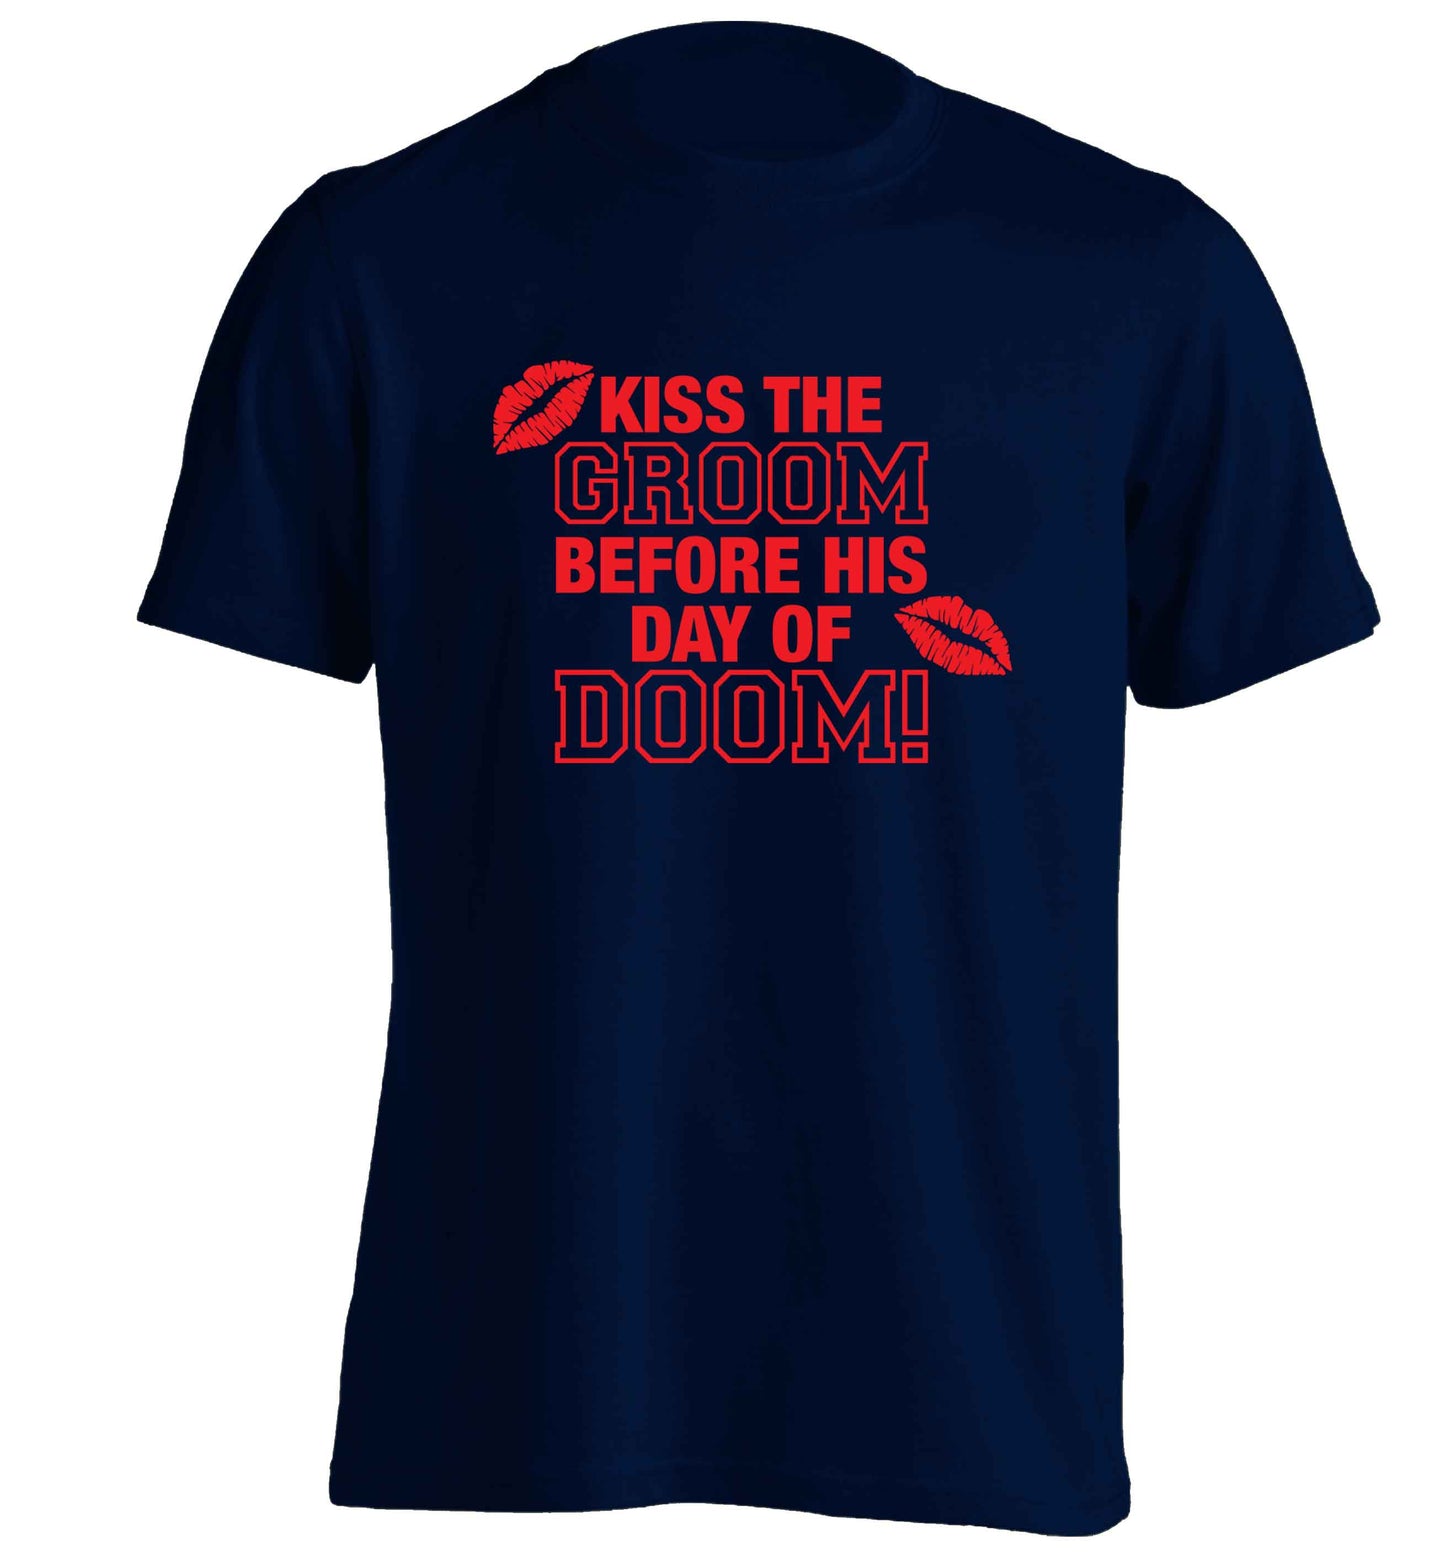 Kiss the groom before his day of doom! adults unisex navy Tshirt 2XL